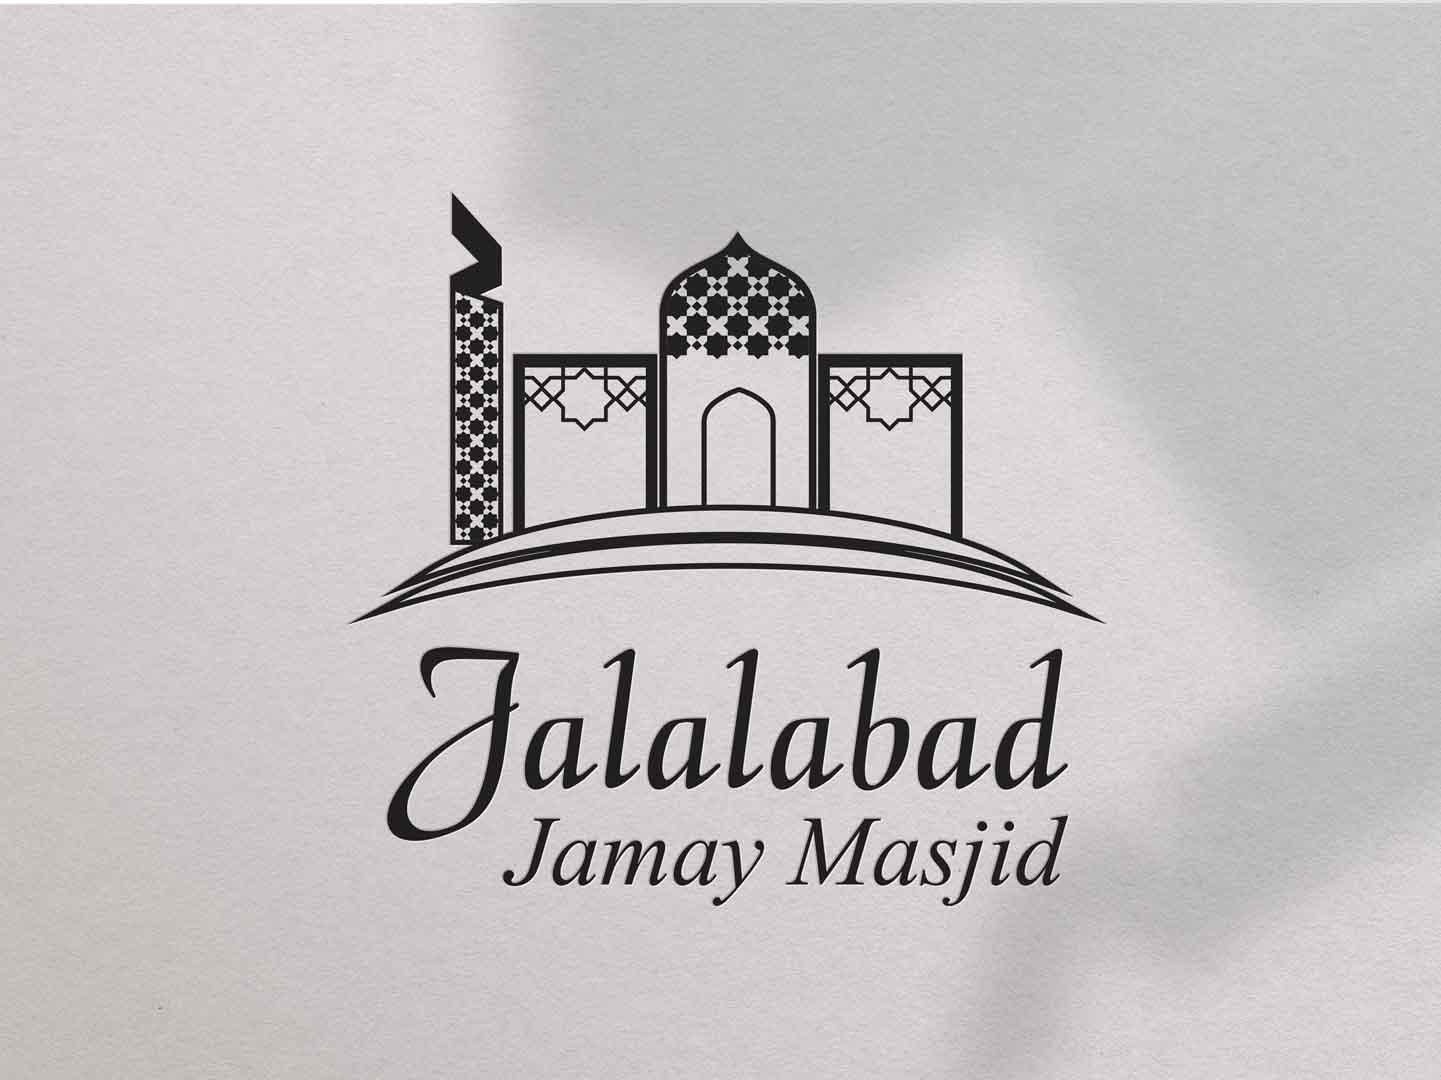 simple mosque art logo for Jalalabad